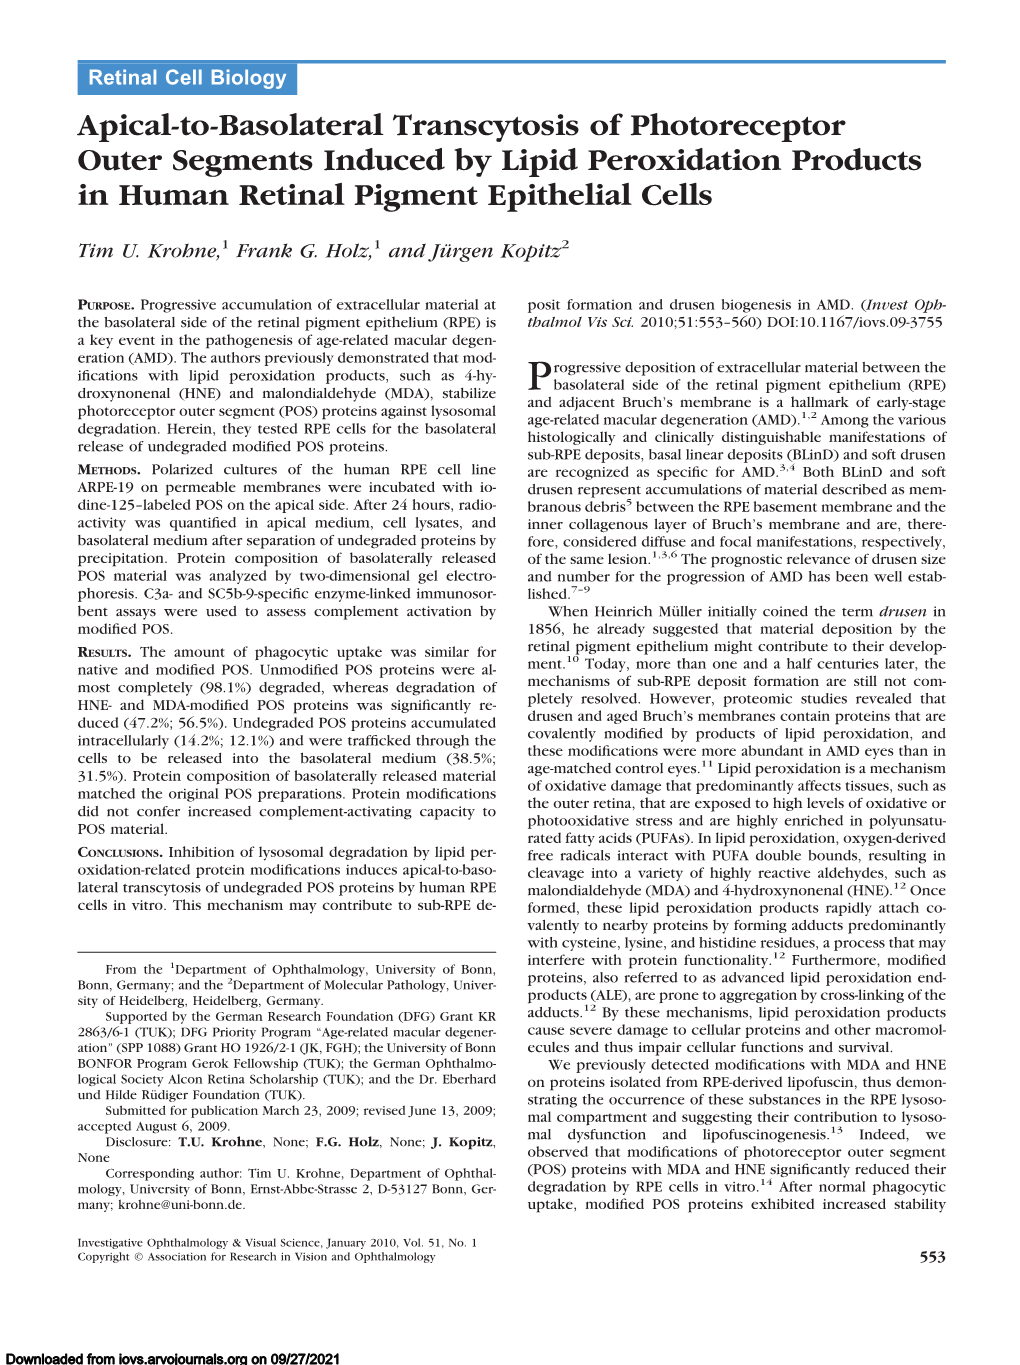 Apical-To-Basolateral Transcytosis of Photoreceptor Outer Segments Induced by Lipid Peroxidation Products in Human Retinal Pigment Epithelial Cells